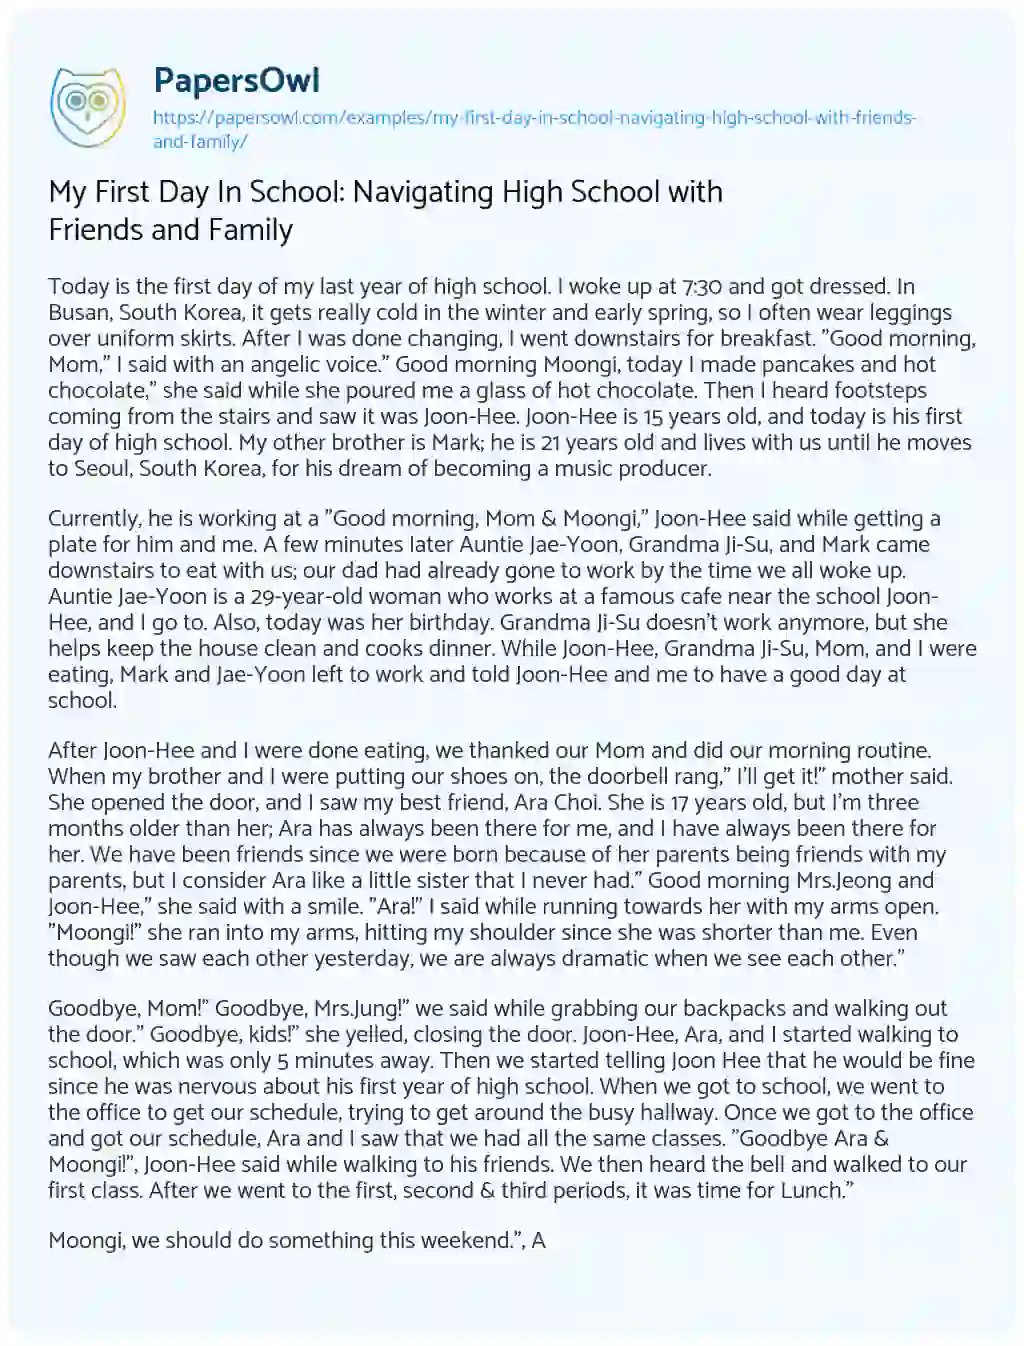 Essay on My First Day in School: Navigating High School with Friends and Family